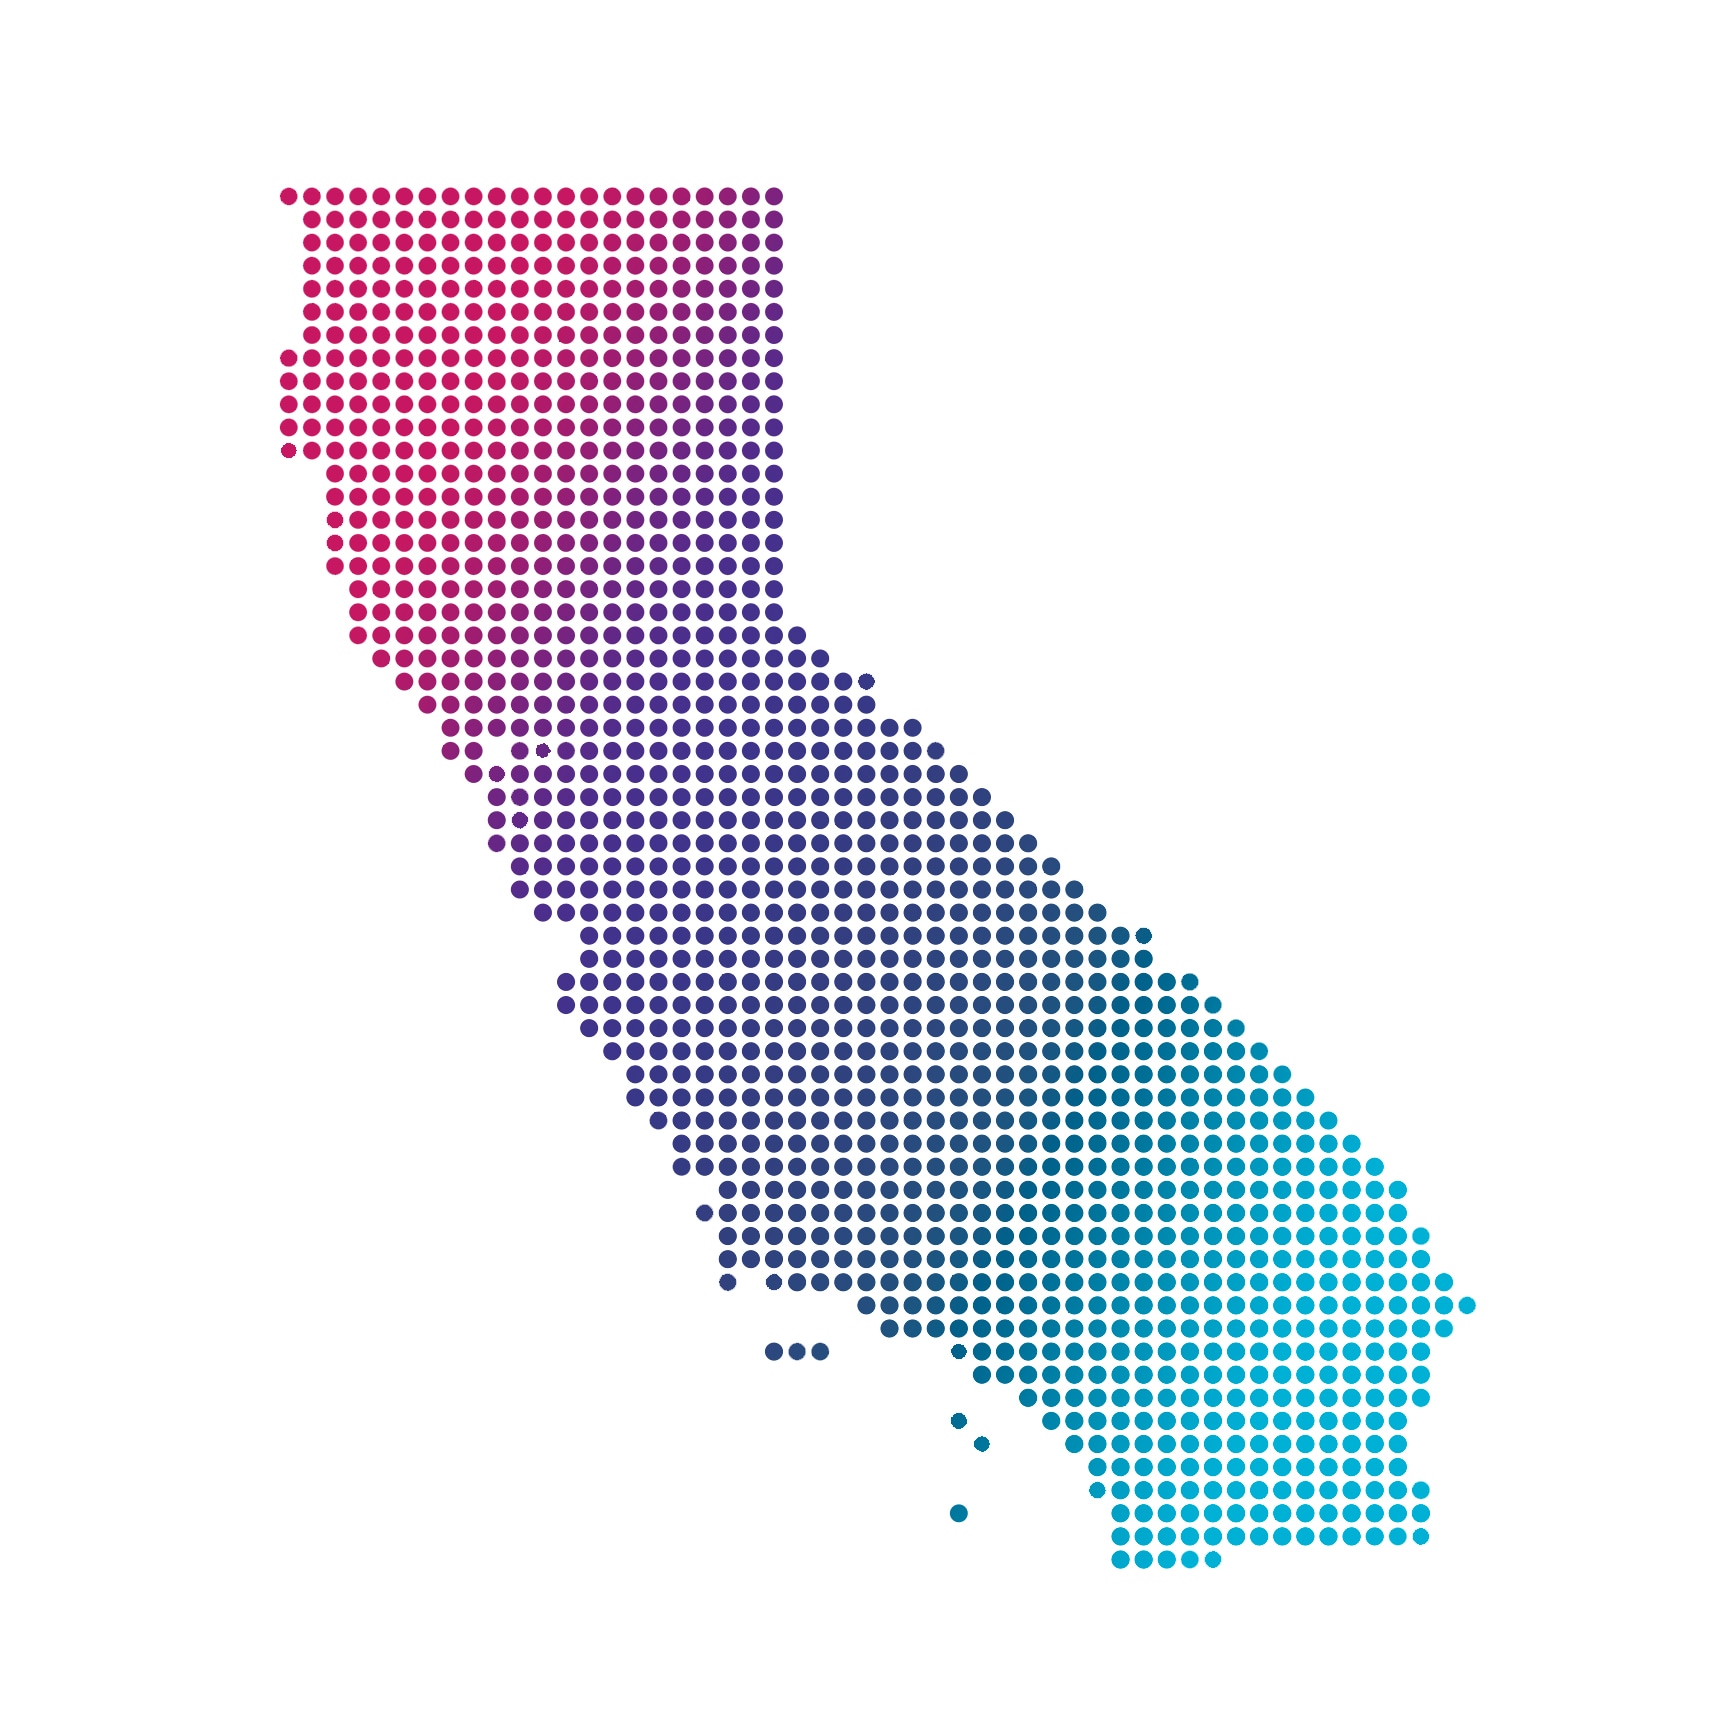 California map of blue dots on white background